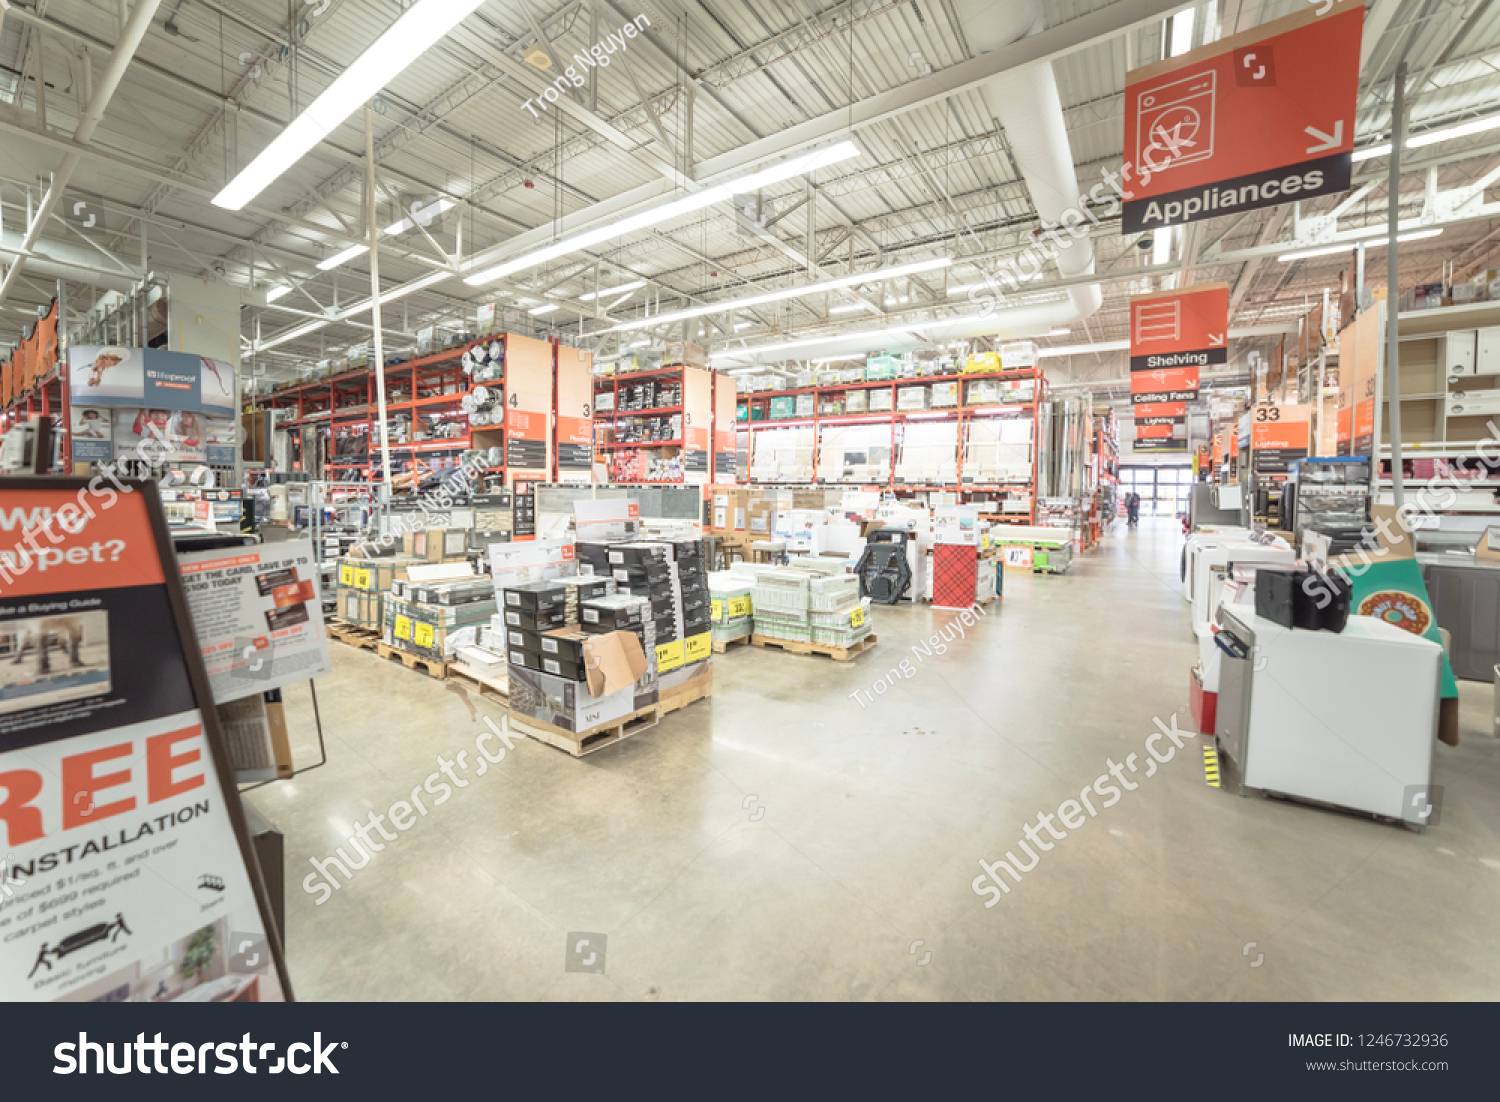 DALLAS, TX, US-DEC 1, 2018: Inside Home Depot store, American home improvement supplies retailing company that sells tools, construction products, and services #1246732936